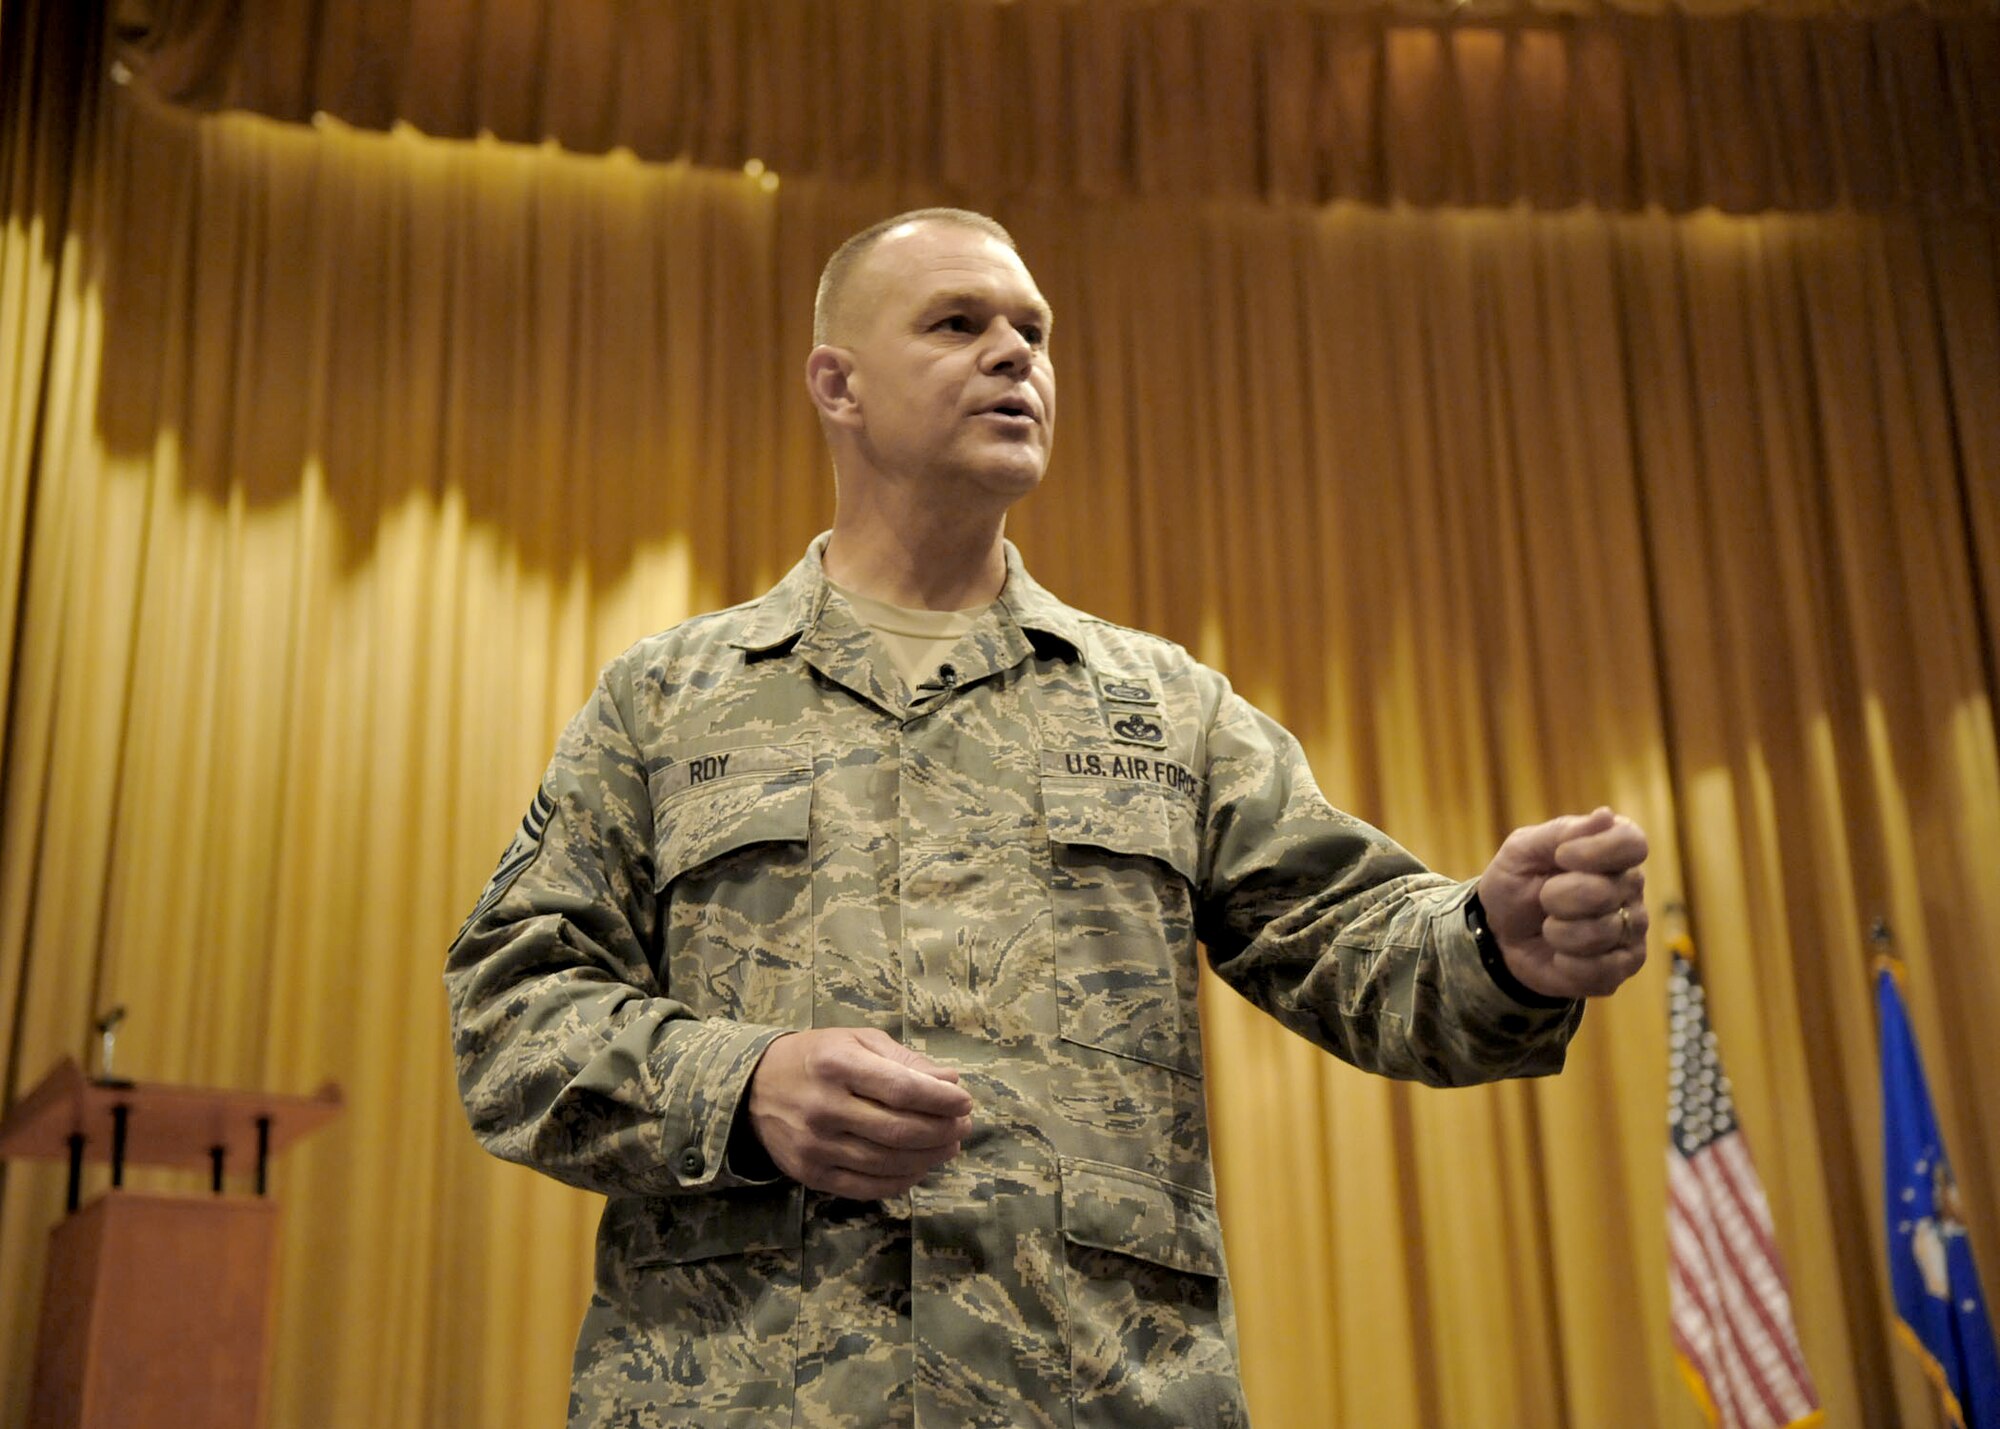 Chief Master Sgt. of the Air Force James A. Roy discusses force development with fellow Airmen in the base theater during his visit June 11, 2010, to Wright-Patterson Air Force Base, Ohio. (U.S. Air Force photo/Tech. Sgt. Brendan Kavanaugh)